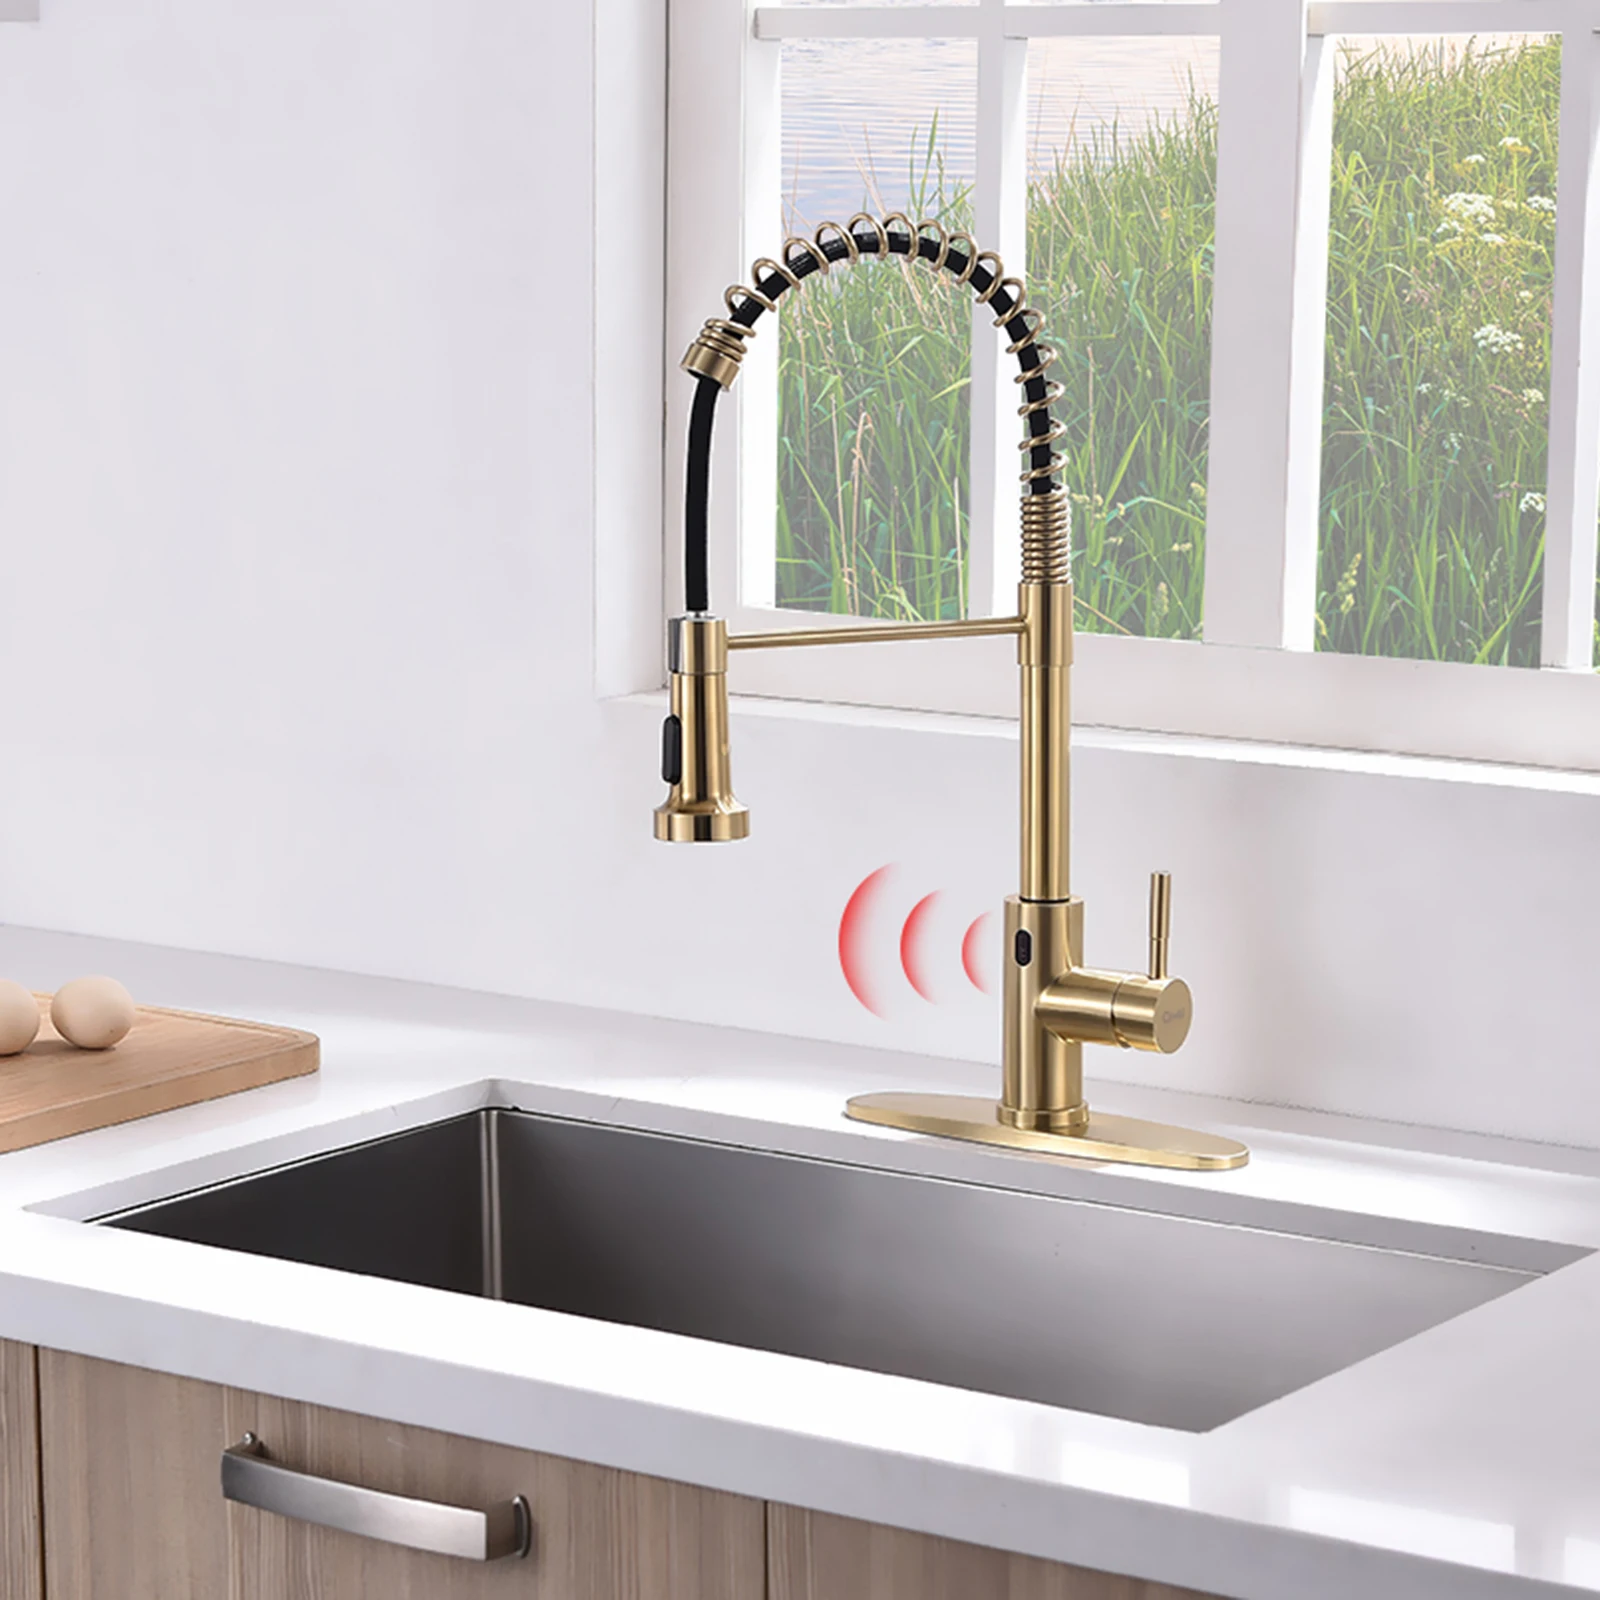 

Luxury Single Hole Tap Pull Out Kitchen Faucets Sink Sprayer Water Non-touch Sensitive Faucet Gold Brass Ceramic Contemporary